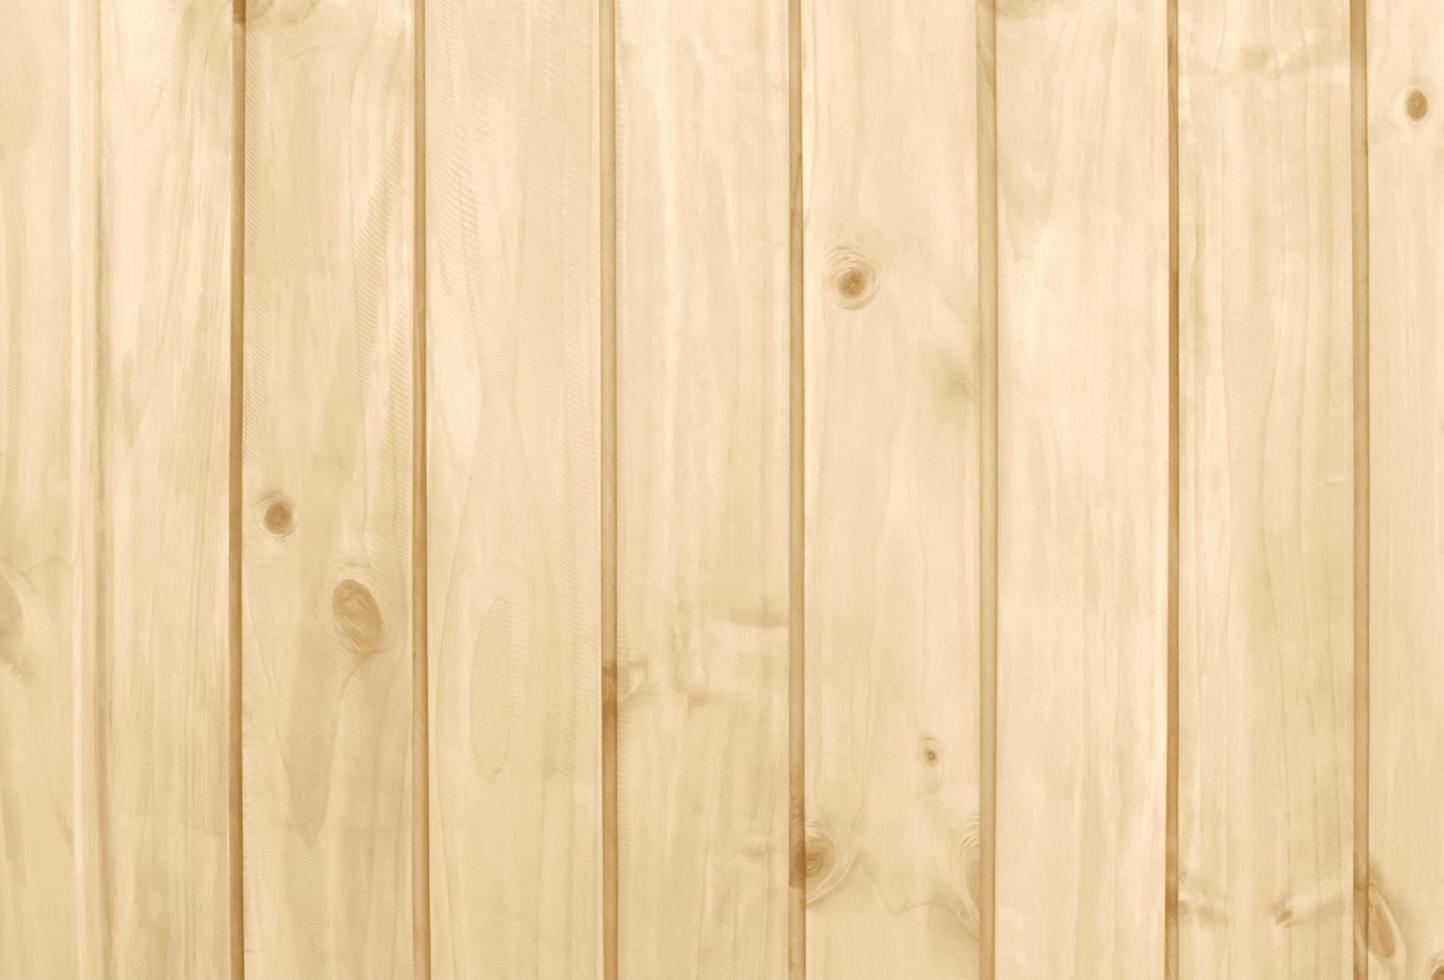 Wooden wall texture abstract background photo